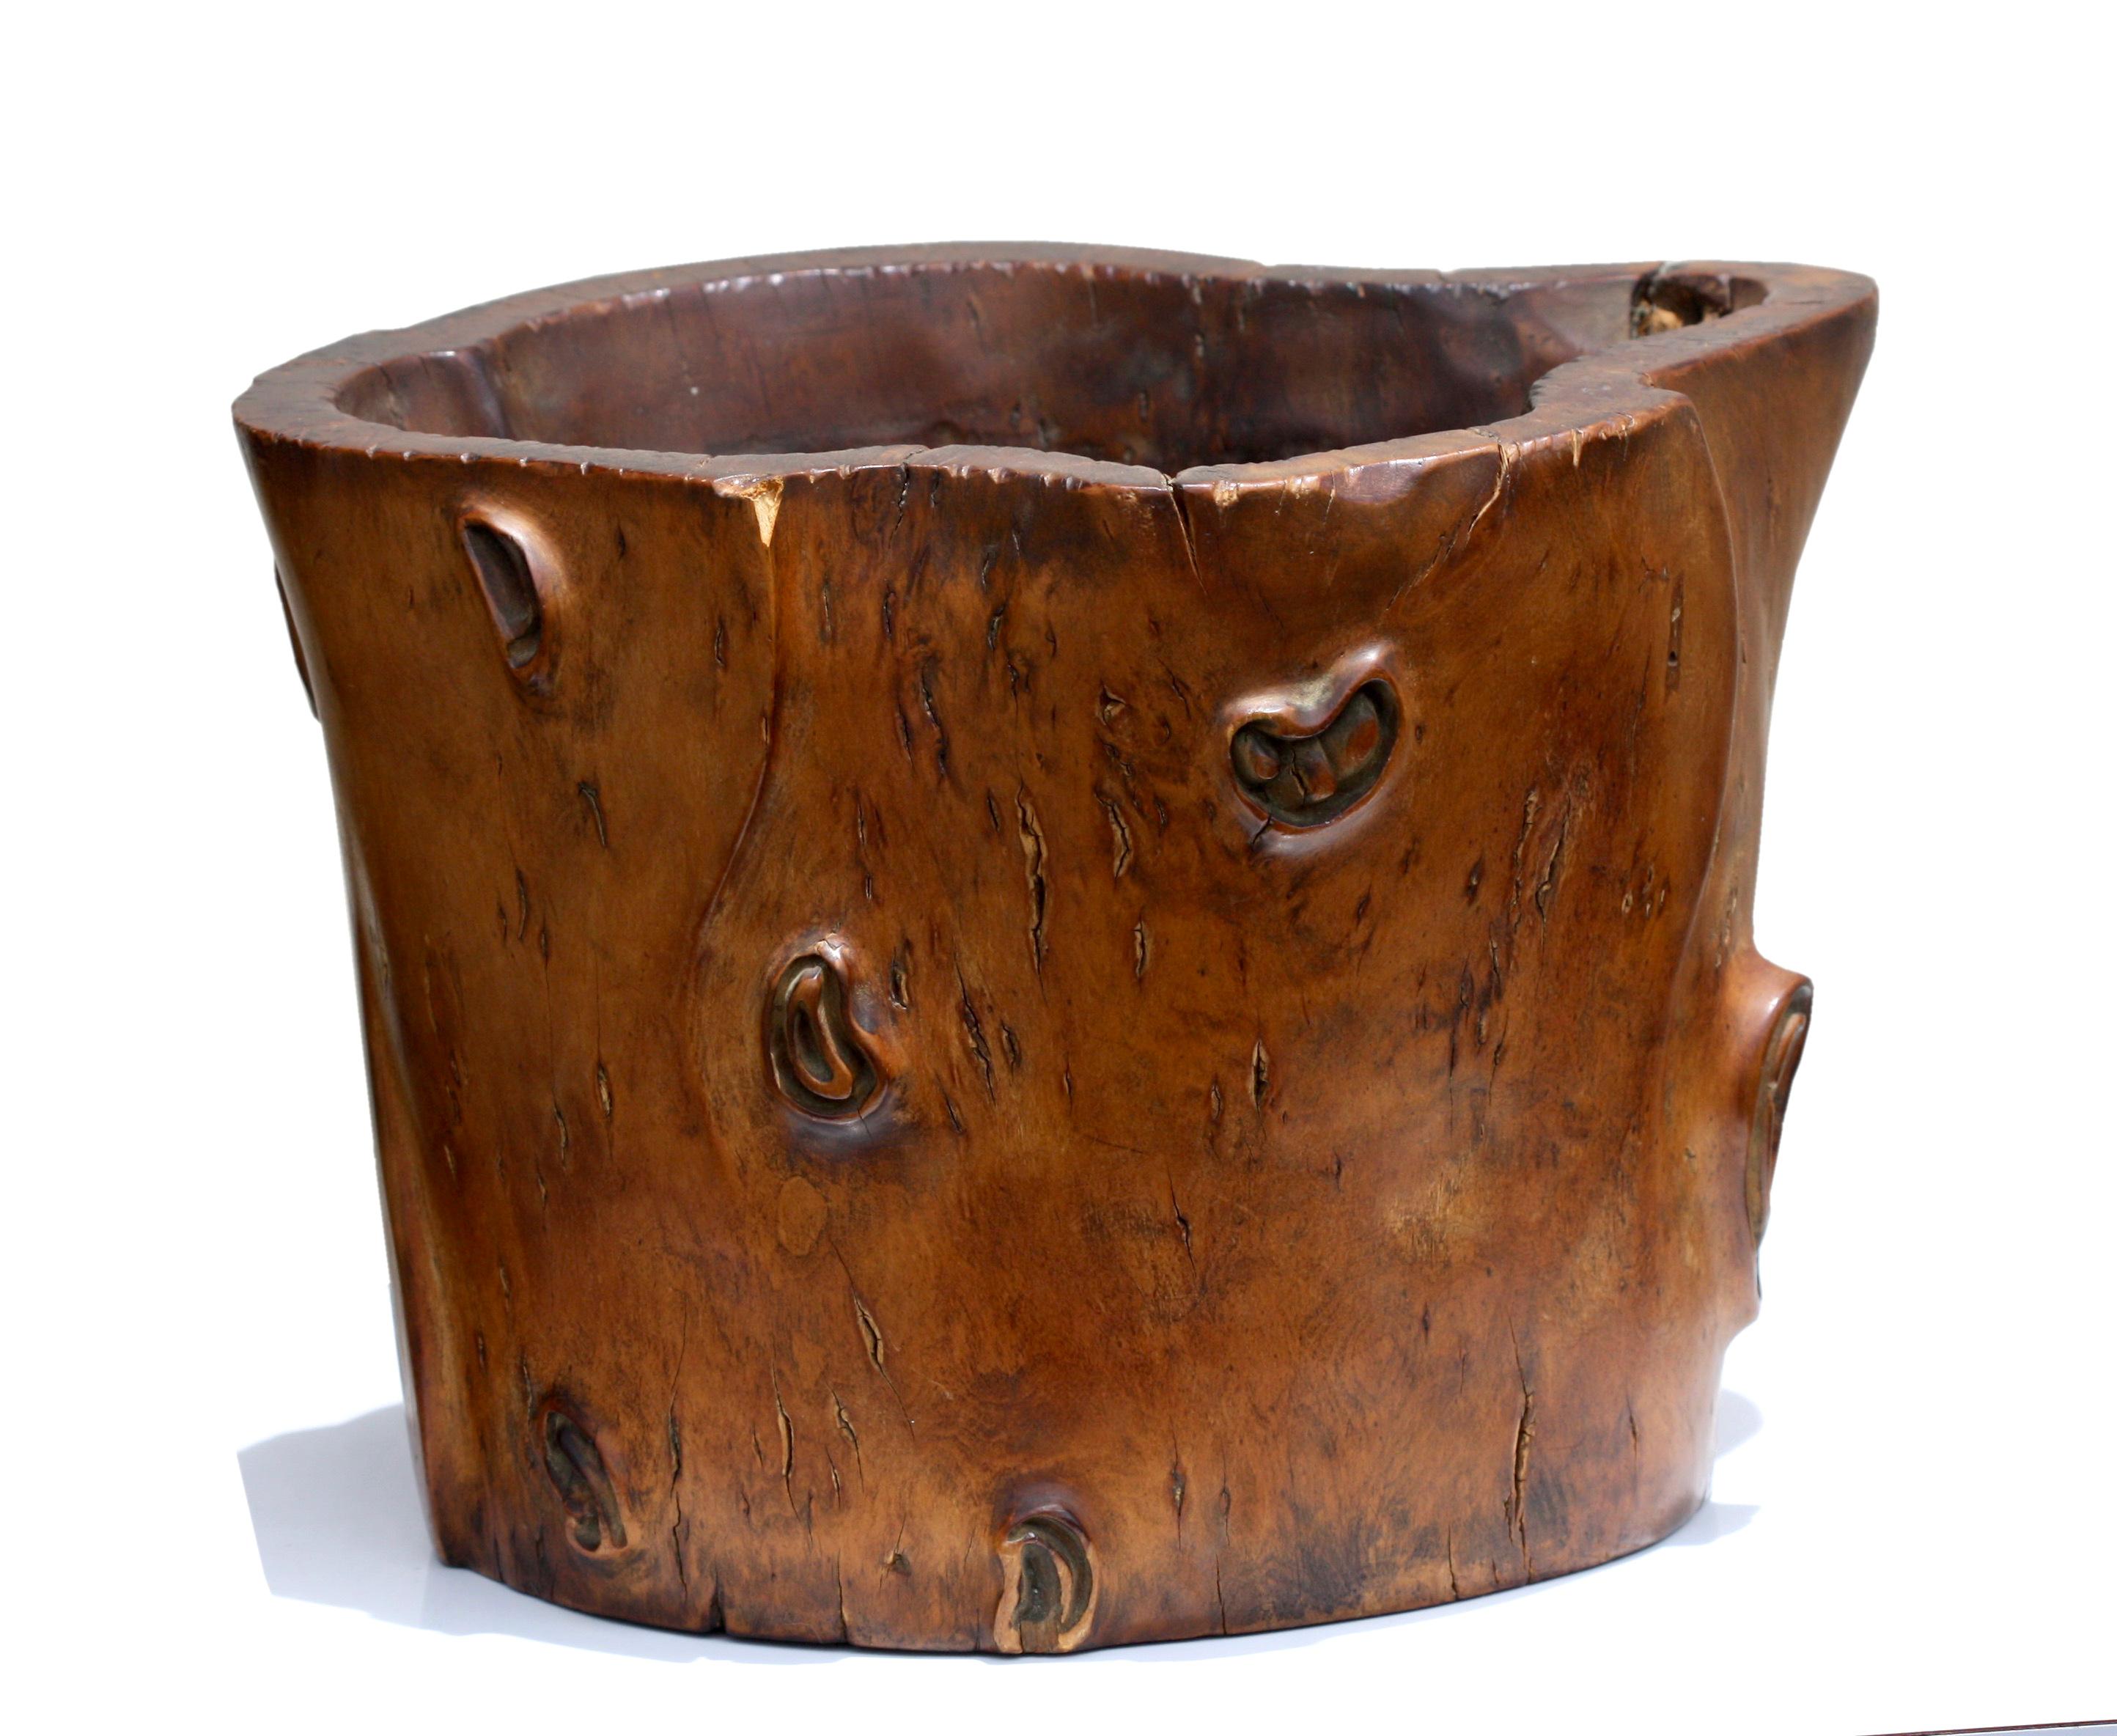 A burl wood brush pot, Qing Dynasty
Chinese, late 19th century, of cylindrical form with a flared lip, the well patinated surface of a warm caramel-brown color,
Measures: 9.50 inches wide, 7 inches high.